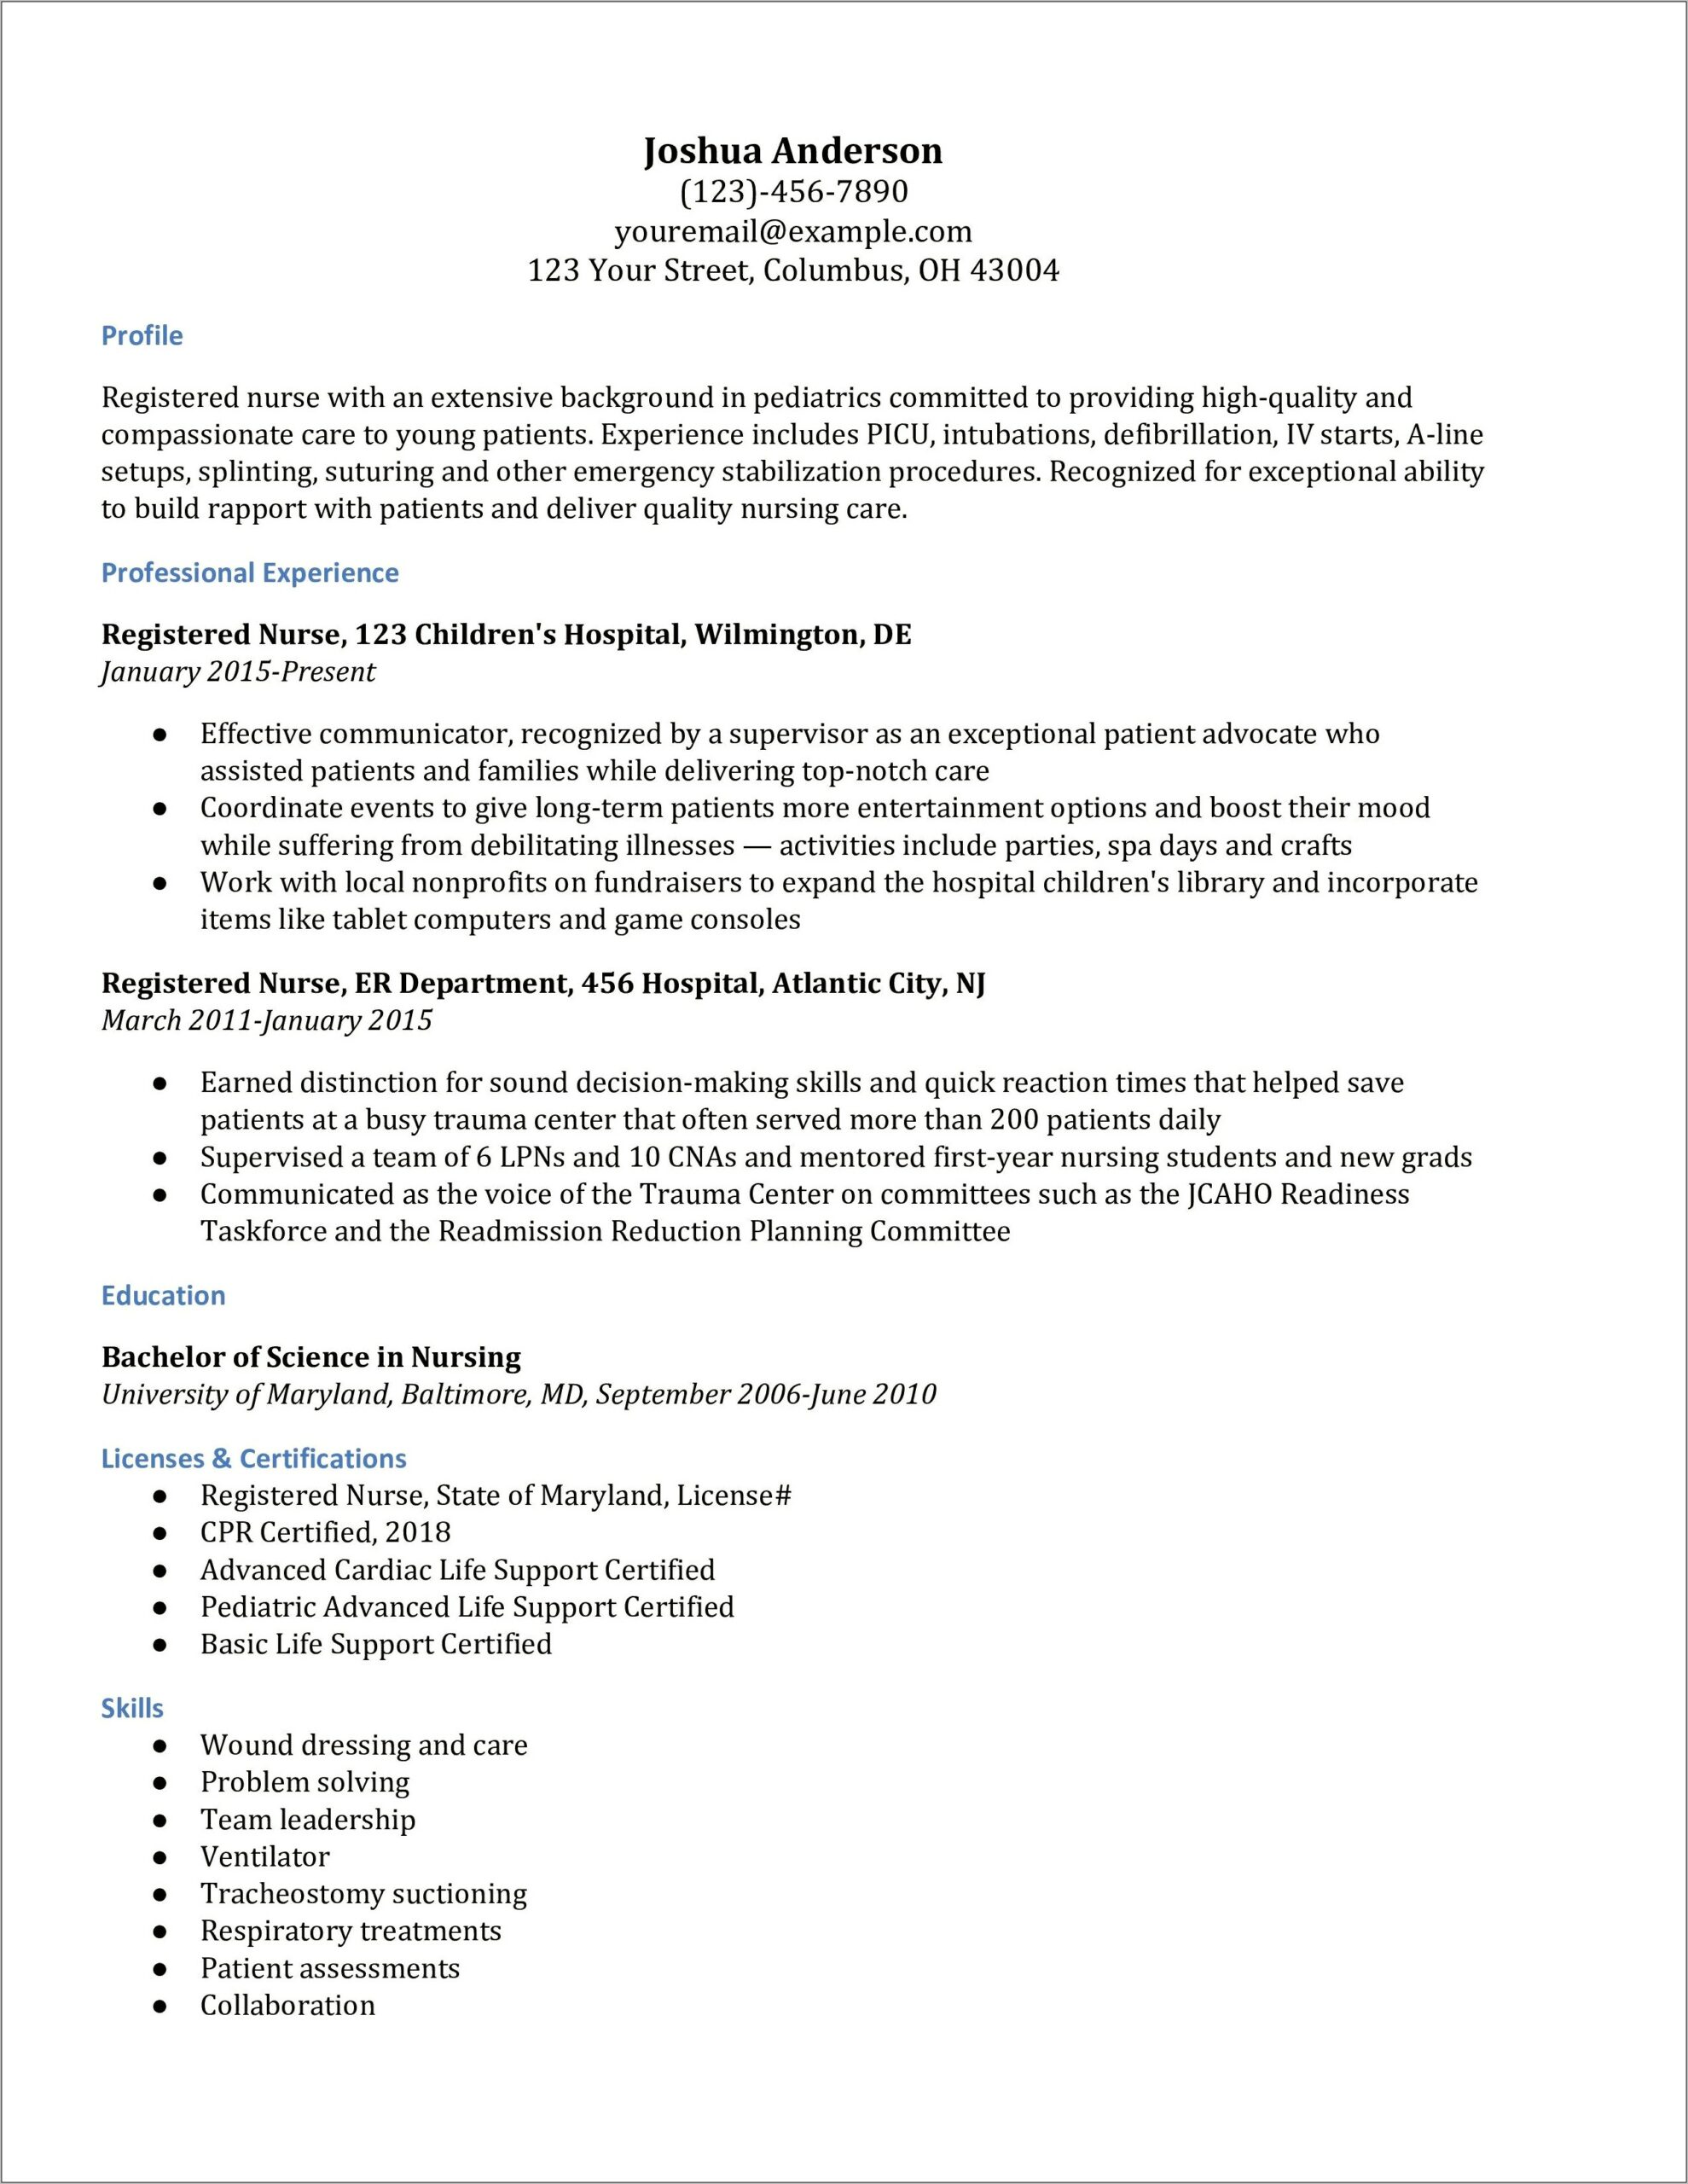 Sample Resume For Registered Nurses With No Experience